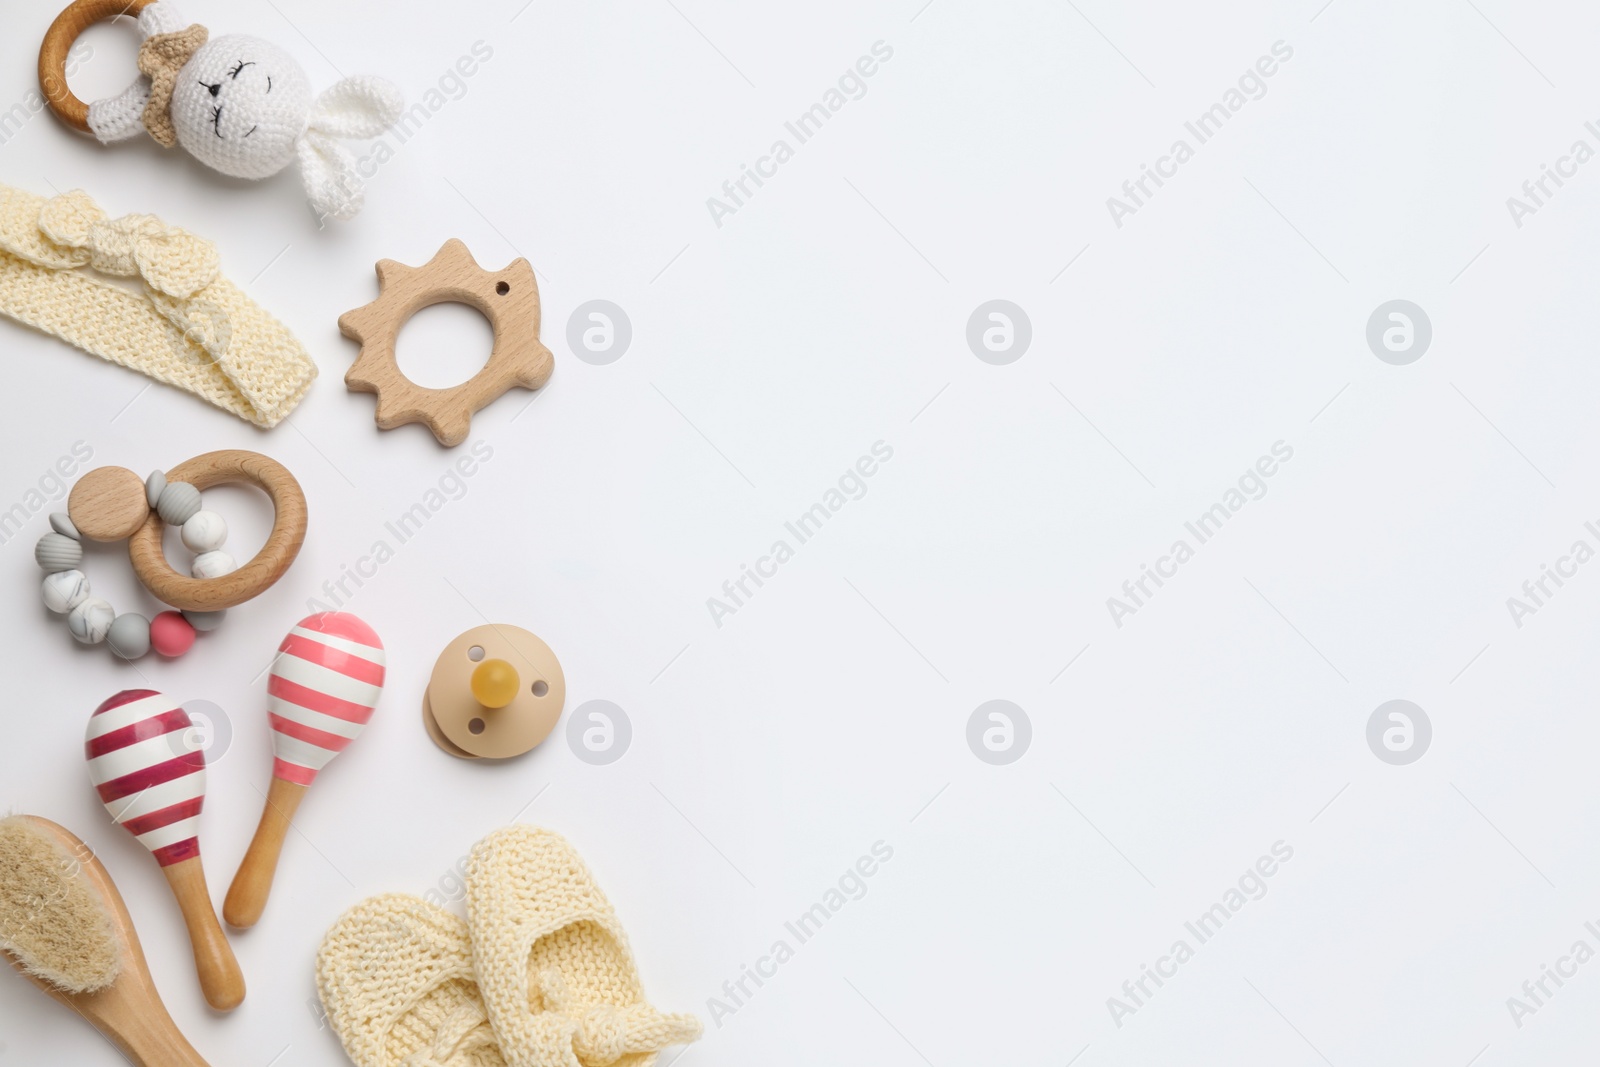 Photo of Cute baby wooden toys and accessories on white background, top view